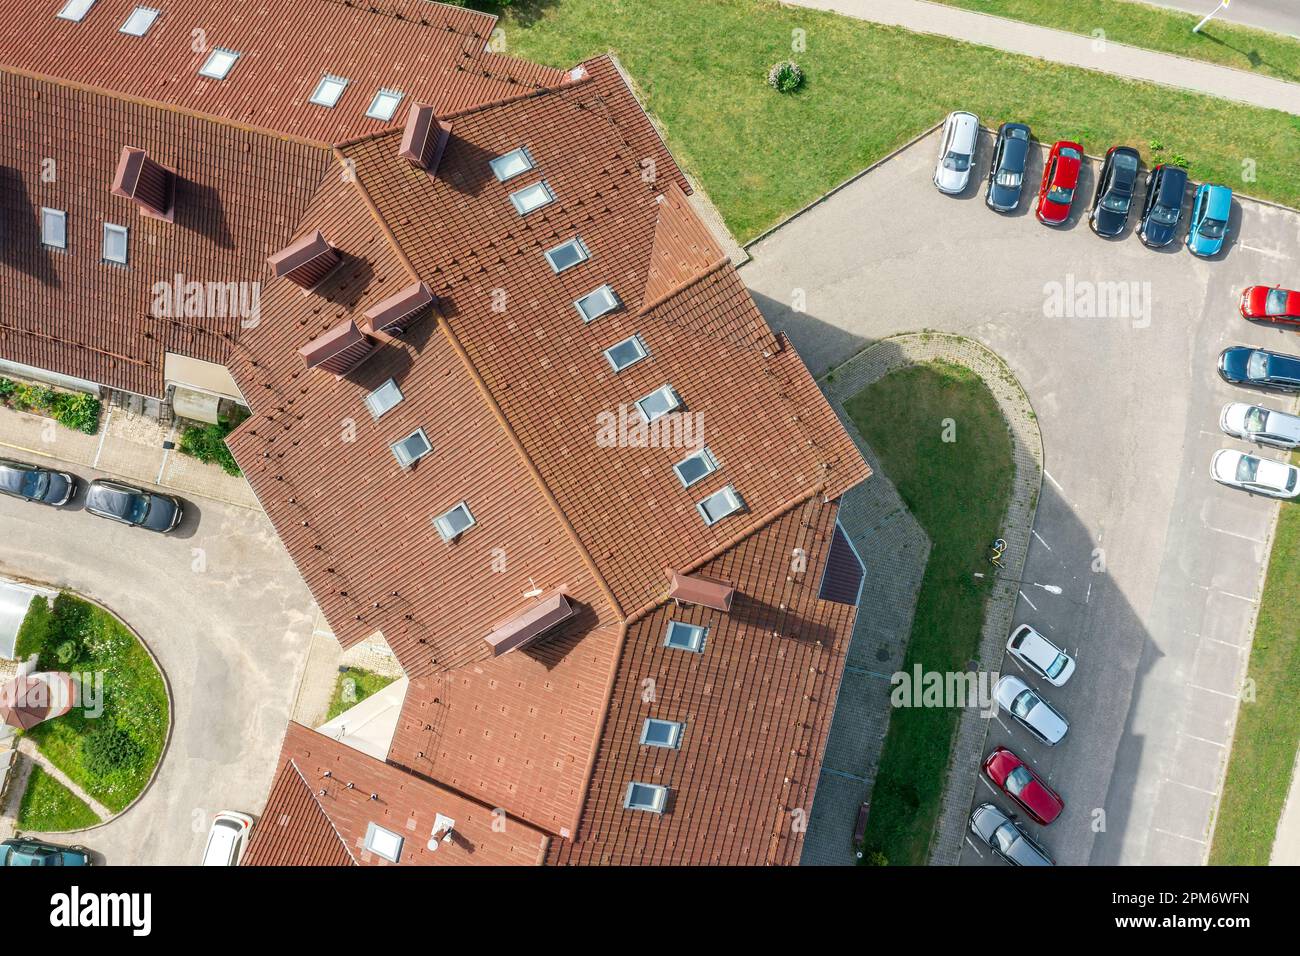 aerial view of residential houses with red roofs in quiet suburbs and street with parked cars. Stock Photo